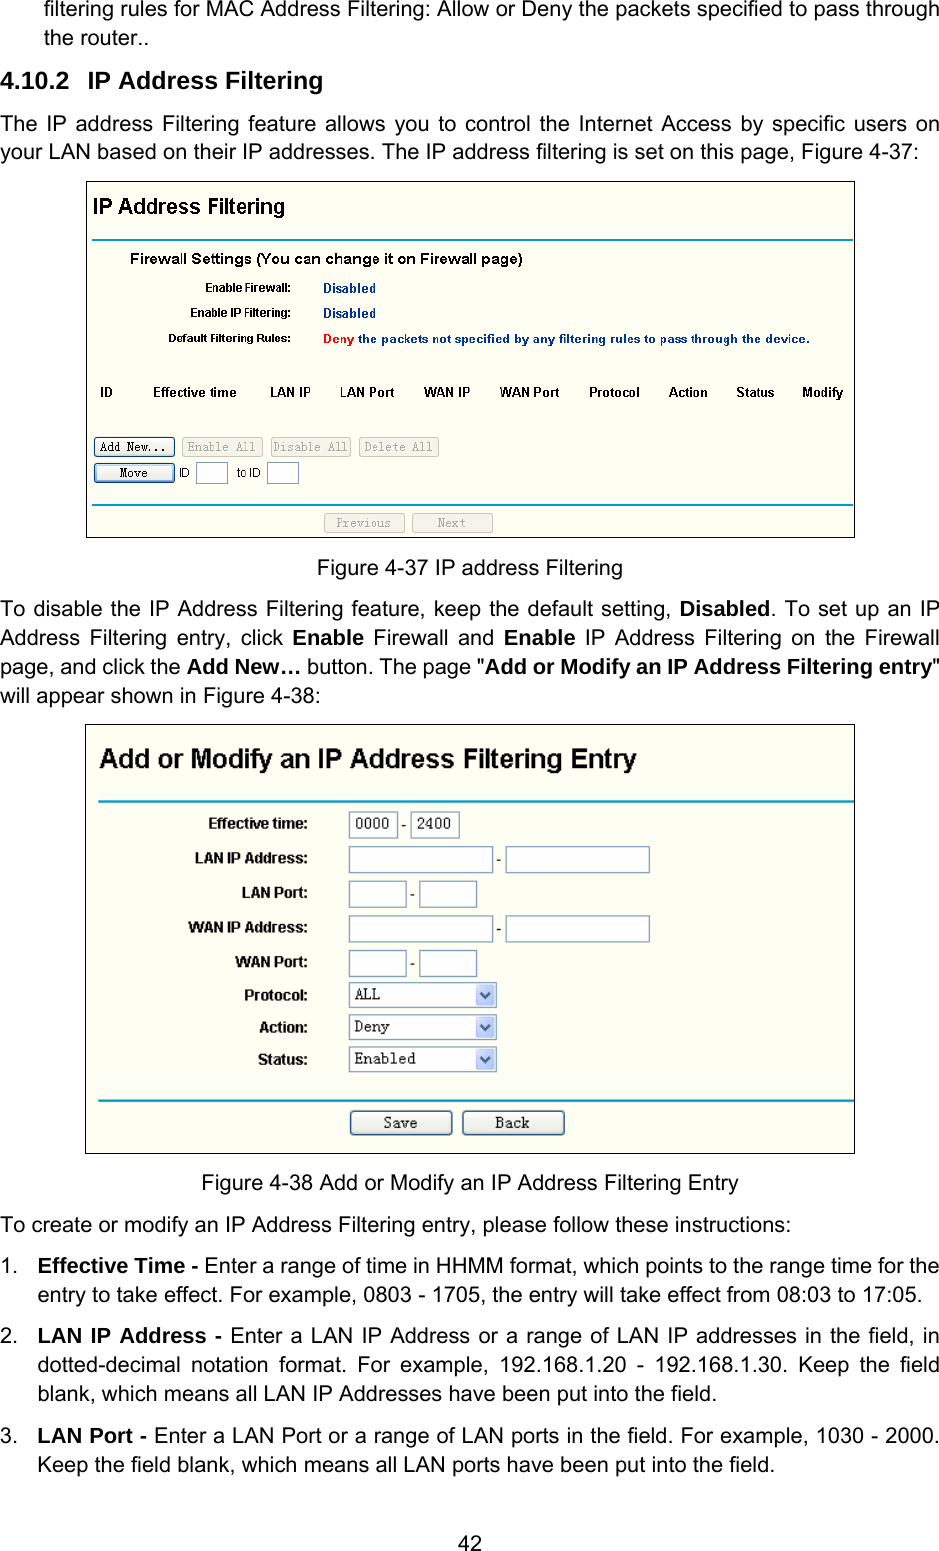  42 filtering rules for MAC Address Filtering: Allow or Deny the packets specified to pass through the router.. 4.10.2  IP Address Filtering The IP address Filtering feature allows you to control the Internet Access by specific users on your LAN based on their IP addresses. The IP address filtering is set on this page, Figure 4-37:  Figure 4-37 IP address Filtering To disable the IP Address Filtering feature, keep the default setting, Disabled. To set up an IP Address Filtering entry, click Enable Firewall and Enable IP Address Filtering on the Firewall page, and click the Add New… button. The page &quot;Add or Modify an IP Address Filtering entry&quot; will appear shown in Figure 4-38:  Figure 4-38 Add or Modify an IP Address Filtering Entry To create or modify an IP Address Filtering entry, please follow these instructions: 1.  Effective Time - Enter a range of time in HHMM format, which points to the range time for the entry to take effect. For example, 0803 - 1705, the entry will take effect from 08:03 to 17:05. 2.  LAN IP Address - Enter a LAN IP Address or a range of LAN IP addresses in the field, in dotted-decimal notation format. For example, 192.168.1.20 - 192.168.1.30. Keep the field blank, which means all LAN IP Addresses have been put into the field.   3.  LAN Port - Enter a LAN Port or a range of LAN ports in the field. For example, 1030 - 2000. Keep the field blank, which means all LAN ports have been put into the field.   